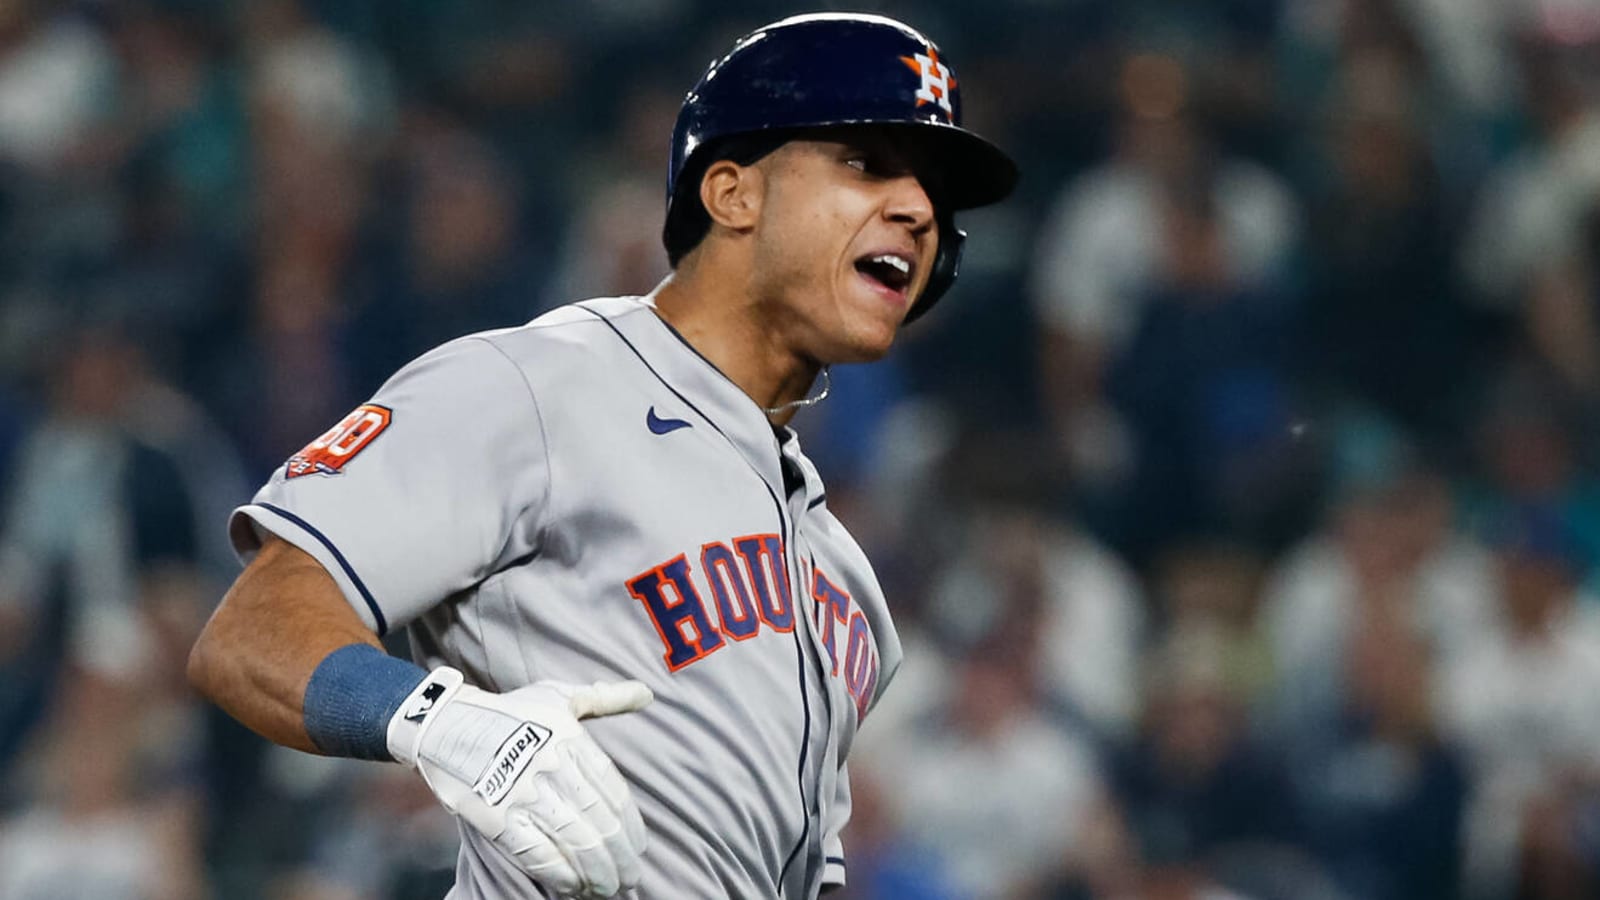 Jeremy Pena's 18th-inning HR sends Astros to ALCS